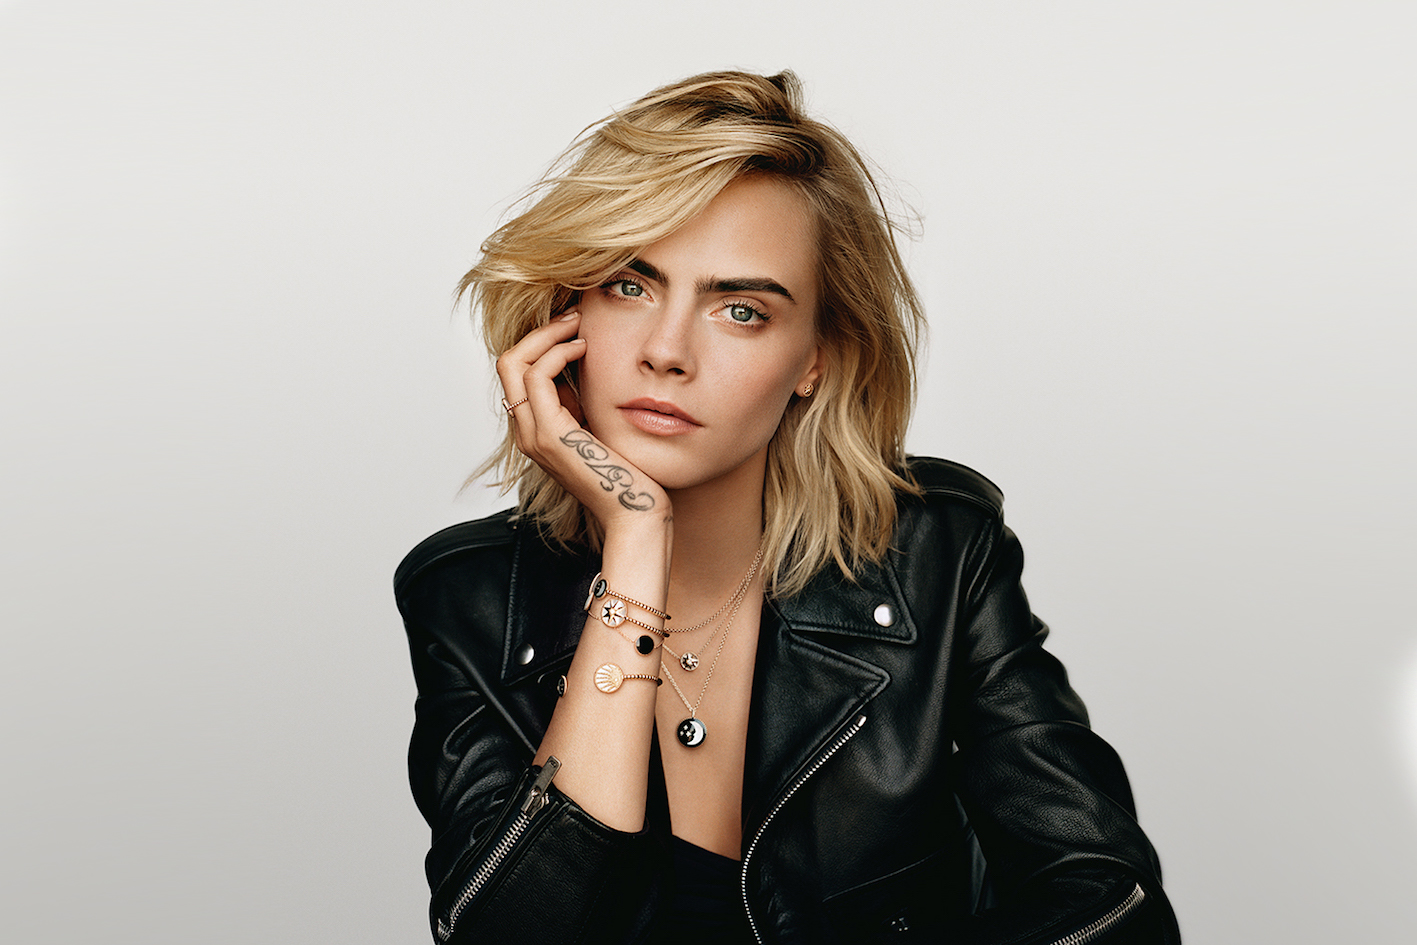 Dior Joaillerie from the Rose Celeste collection by Victoire de Castellane, worn by model Cara Delevingne